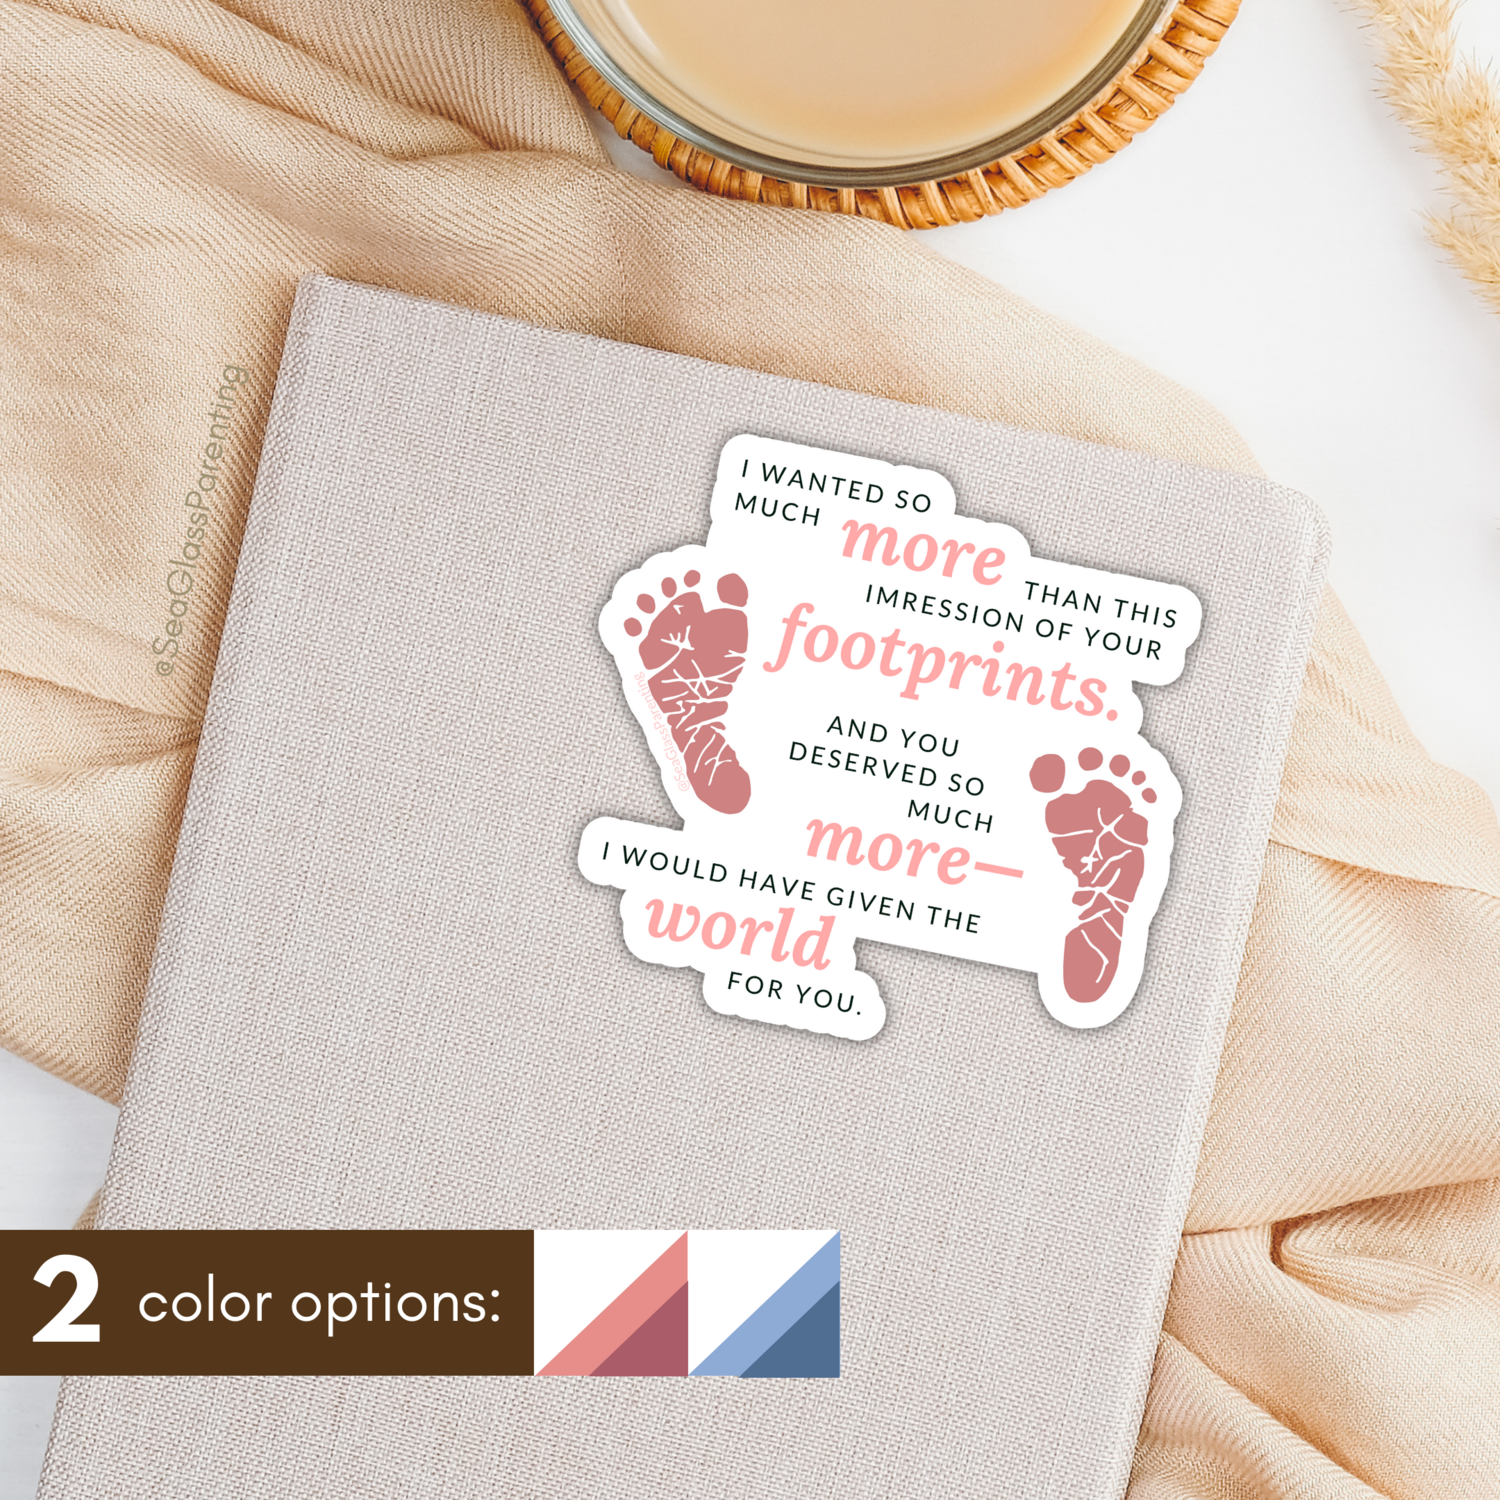 I wanted so much more than this impression of your footprints—Baby Loss Remembrance (sticker)